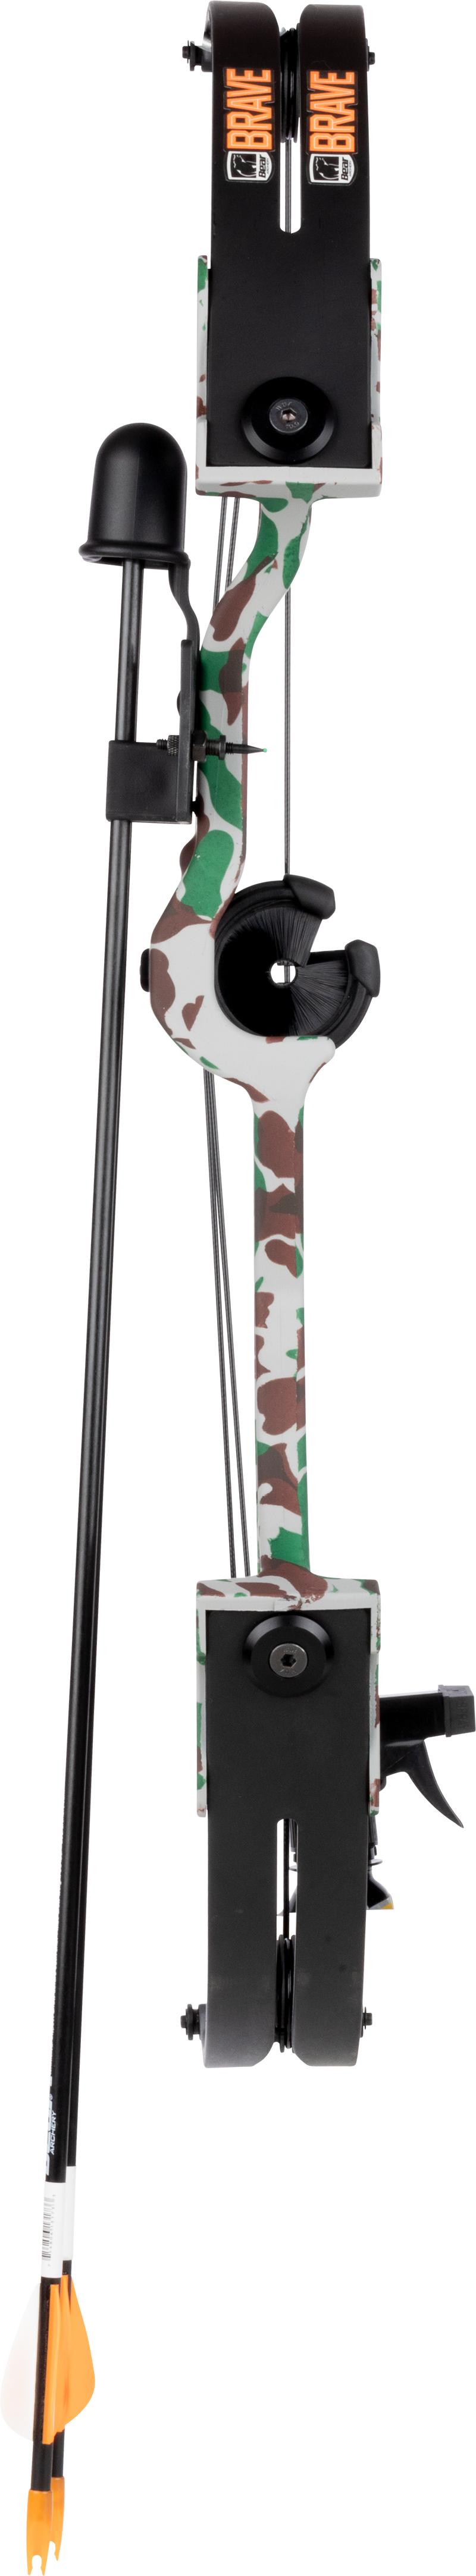 Bear Brave Bow with Biscuit - Camo Youth Compound Bow - Youth_10